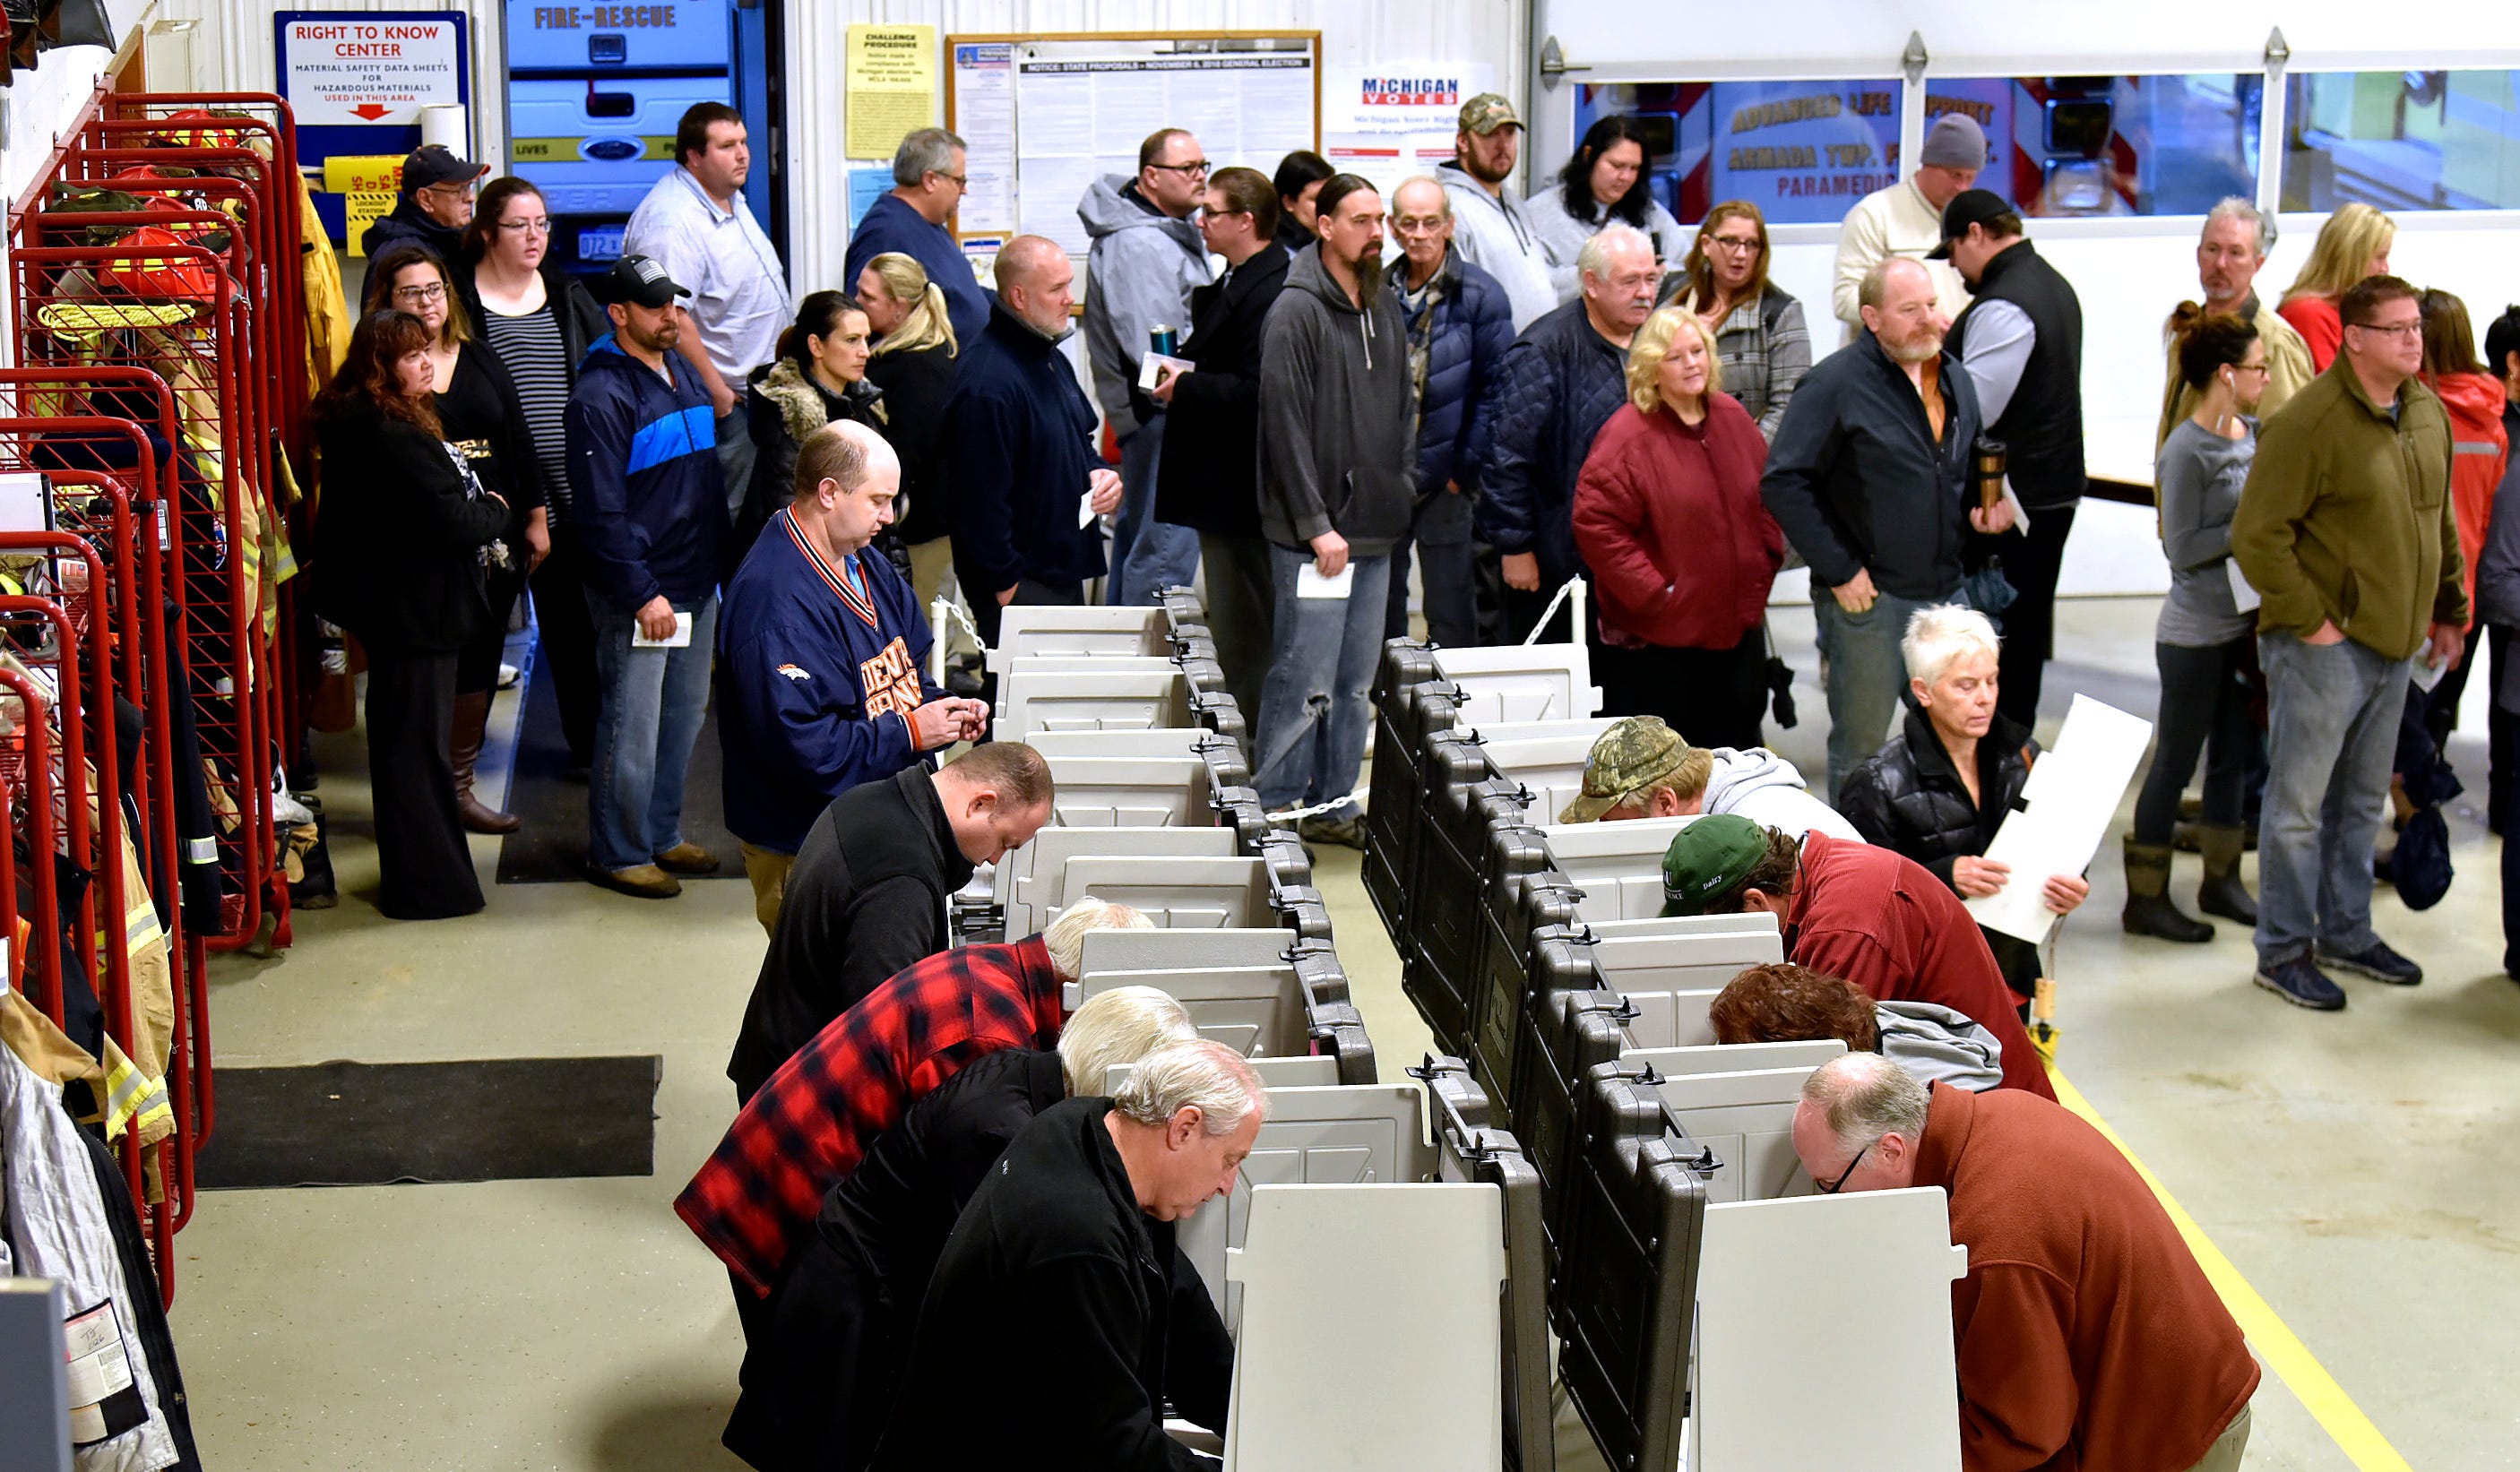 Voter lines serpentine at Precinct One inside the fire bay at the Armada Twp. Fire Department, Tuesday morning, Nov. 6, 2018. Armada Township voters are considering an increase to a Fire Protection Millage, which would provide additional funding for new fire trucks and firefighting equipment.